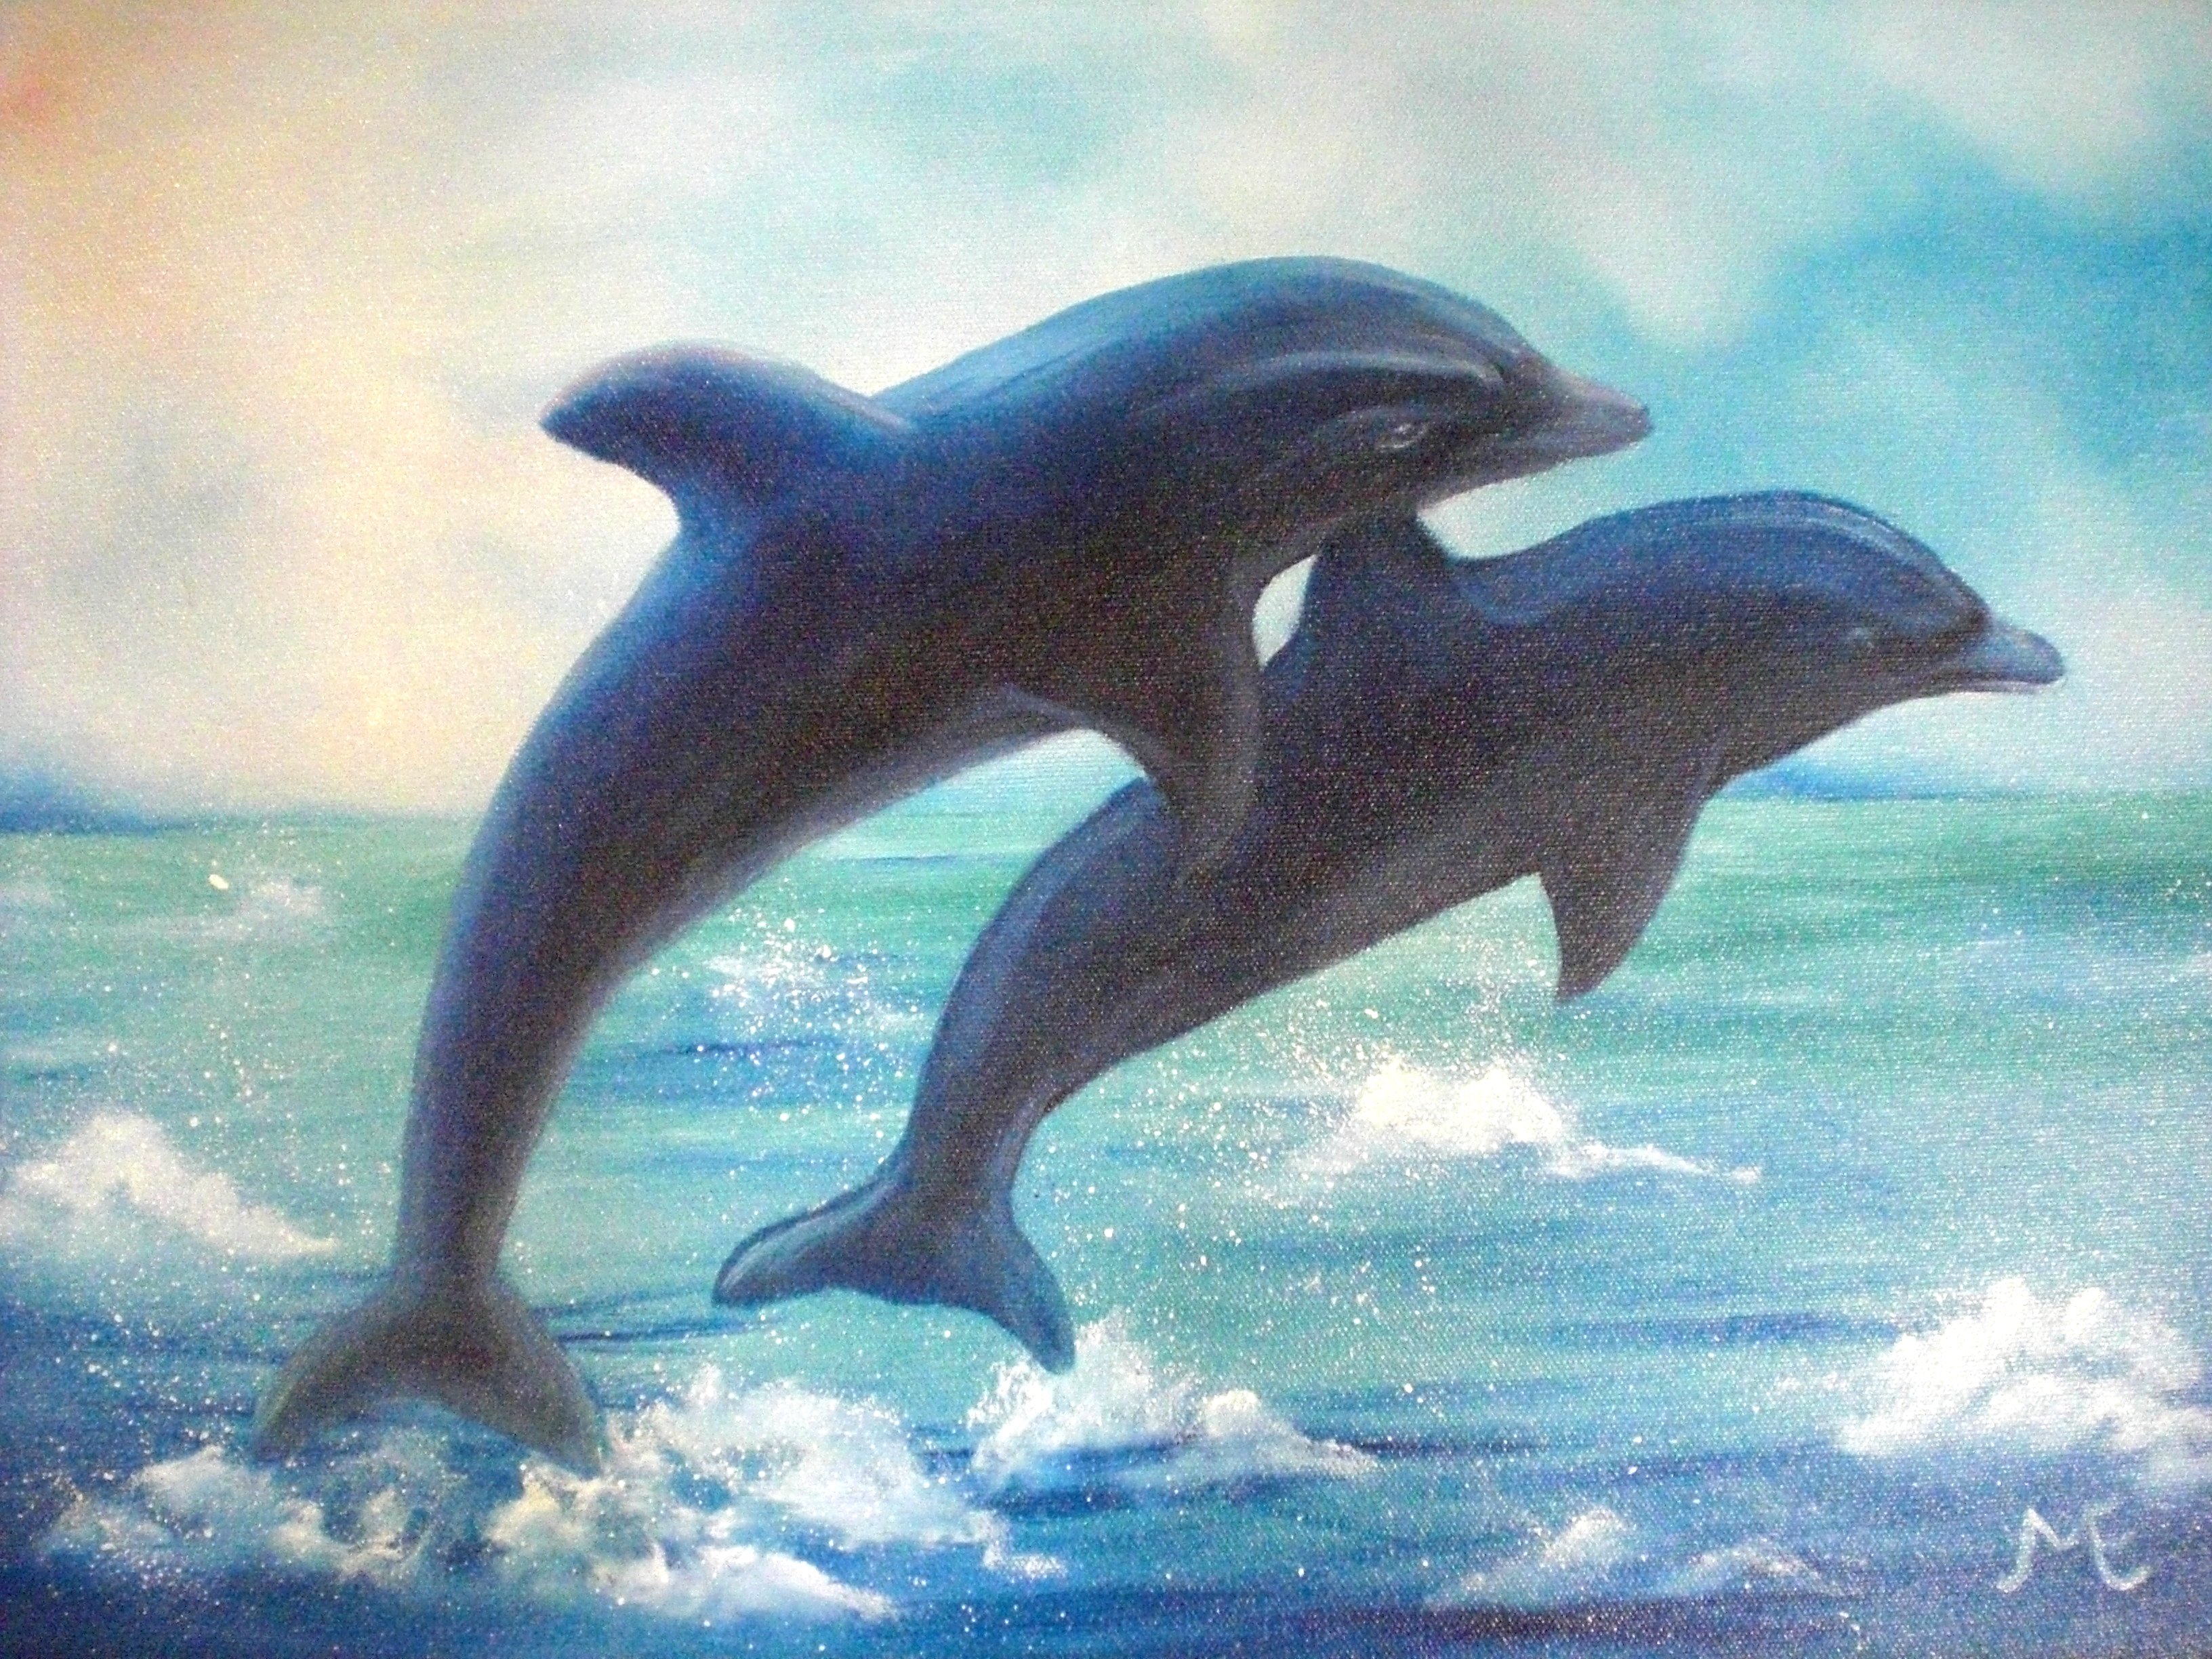 Free download Cartoon Dolphin Background wallpaper wallpaper HD background [3264x2448] for your Desktop, Mobile & Tablet. Explore Free Animated Dolphin Wallpaper DesktopD Moving Wallpaper Free, Free Animated Wallpaper